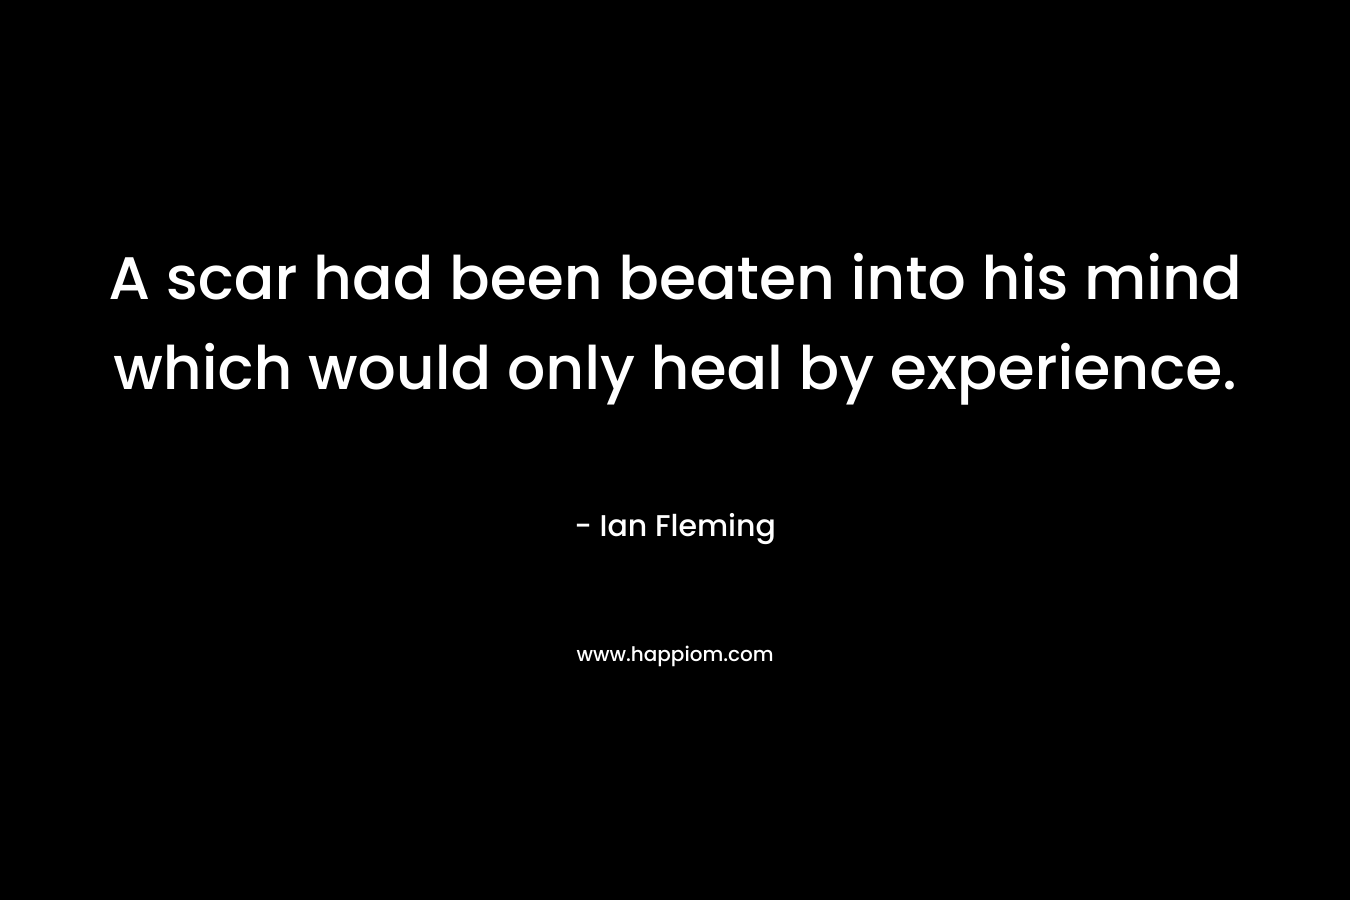 A scar had been beaten into his mind which would only heal by experience. – Ian Fleming